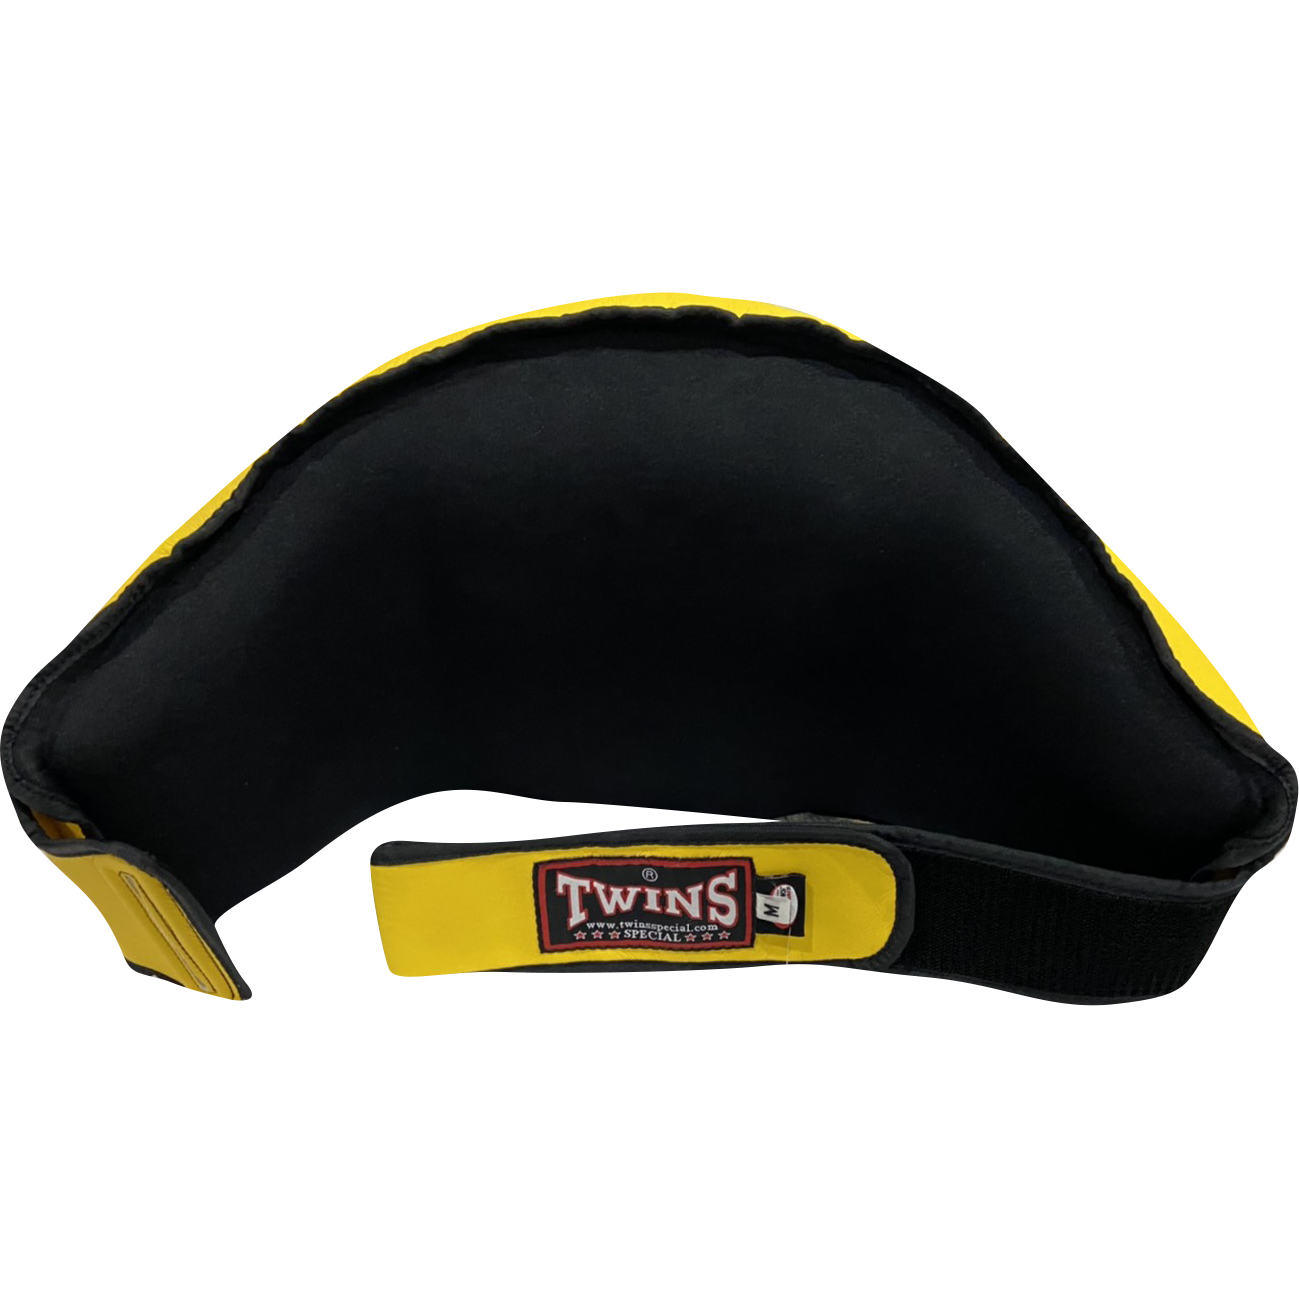 Twins Special Belly Pad BEPS4 Yellow